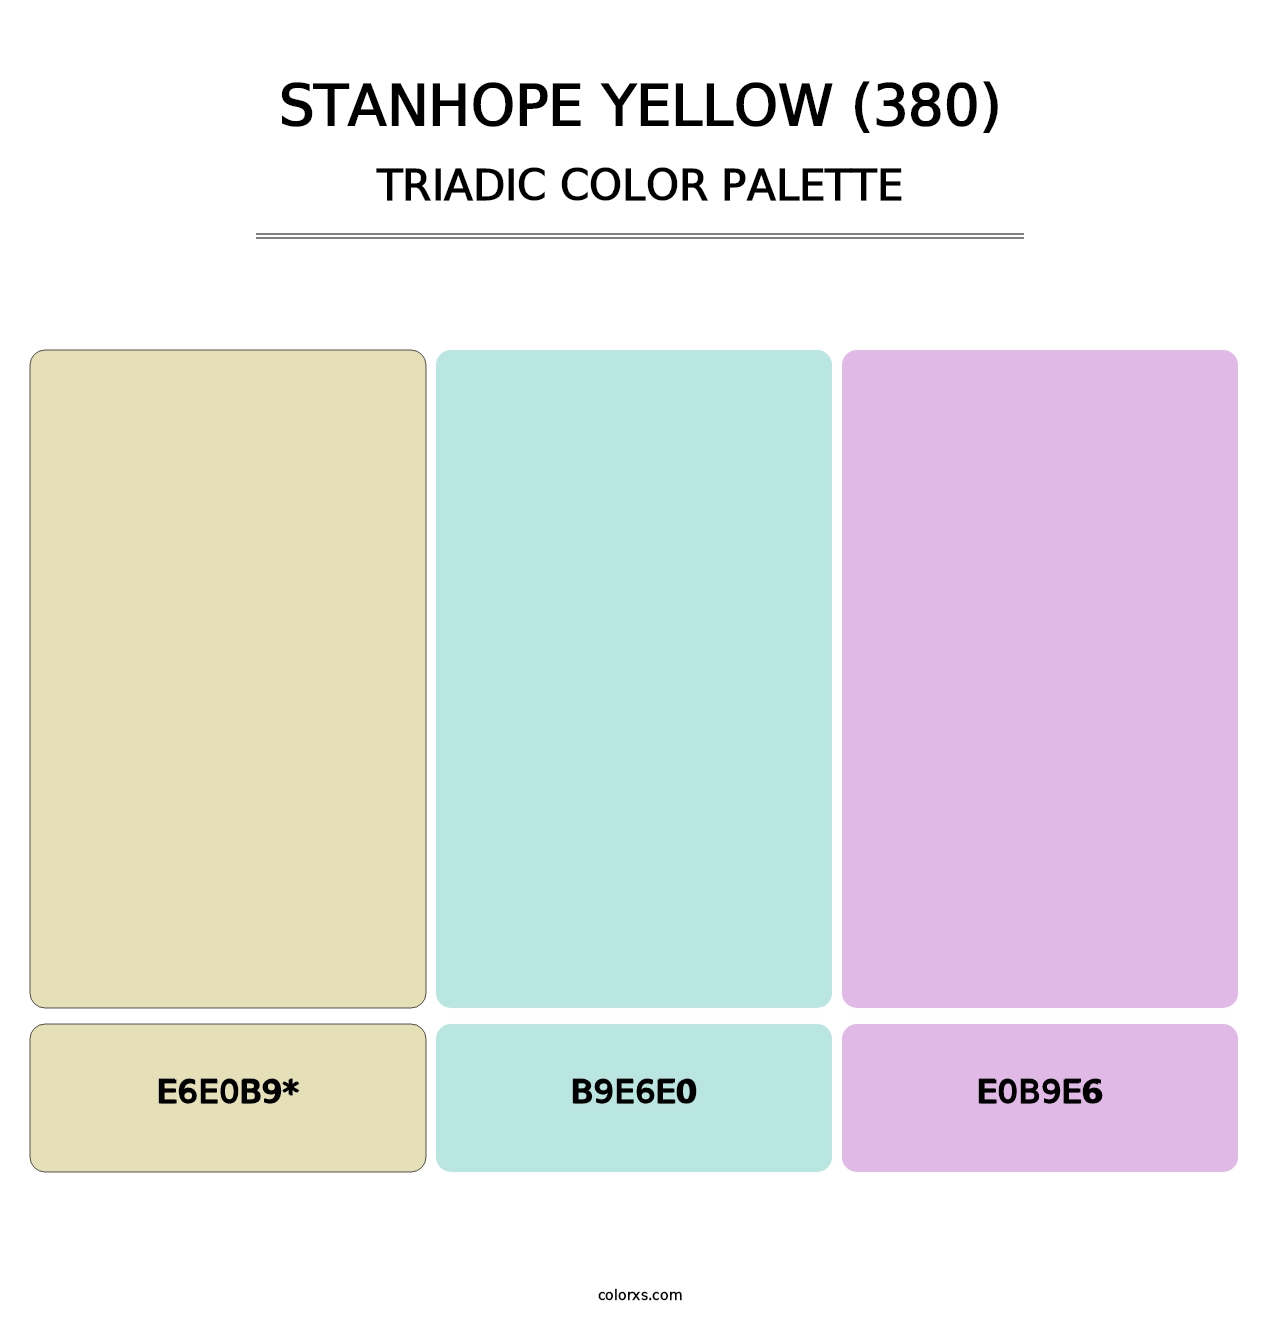 Stanhope Yellow (380) - Triadic Color Palette